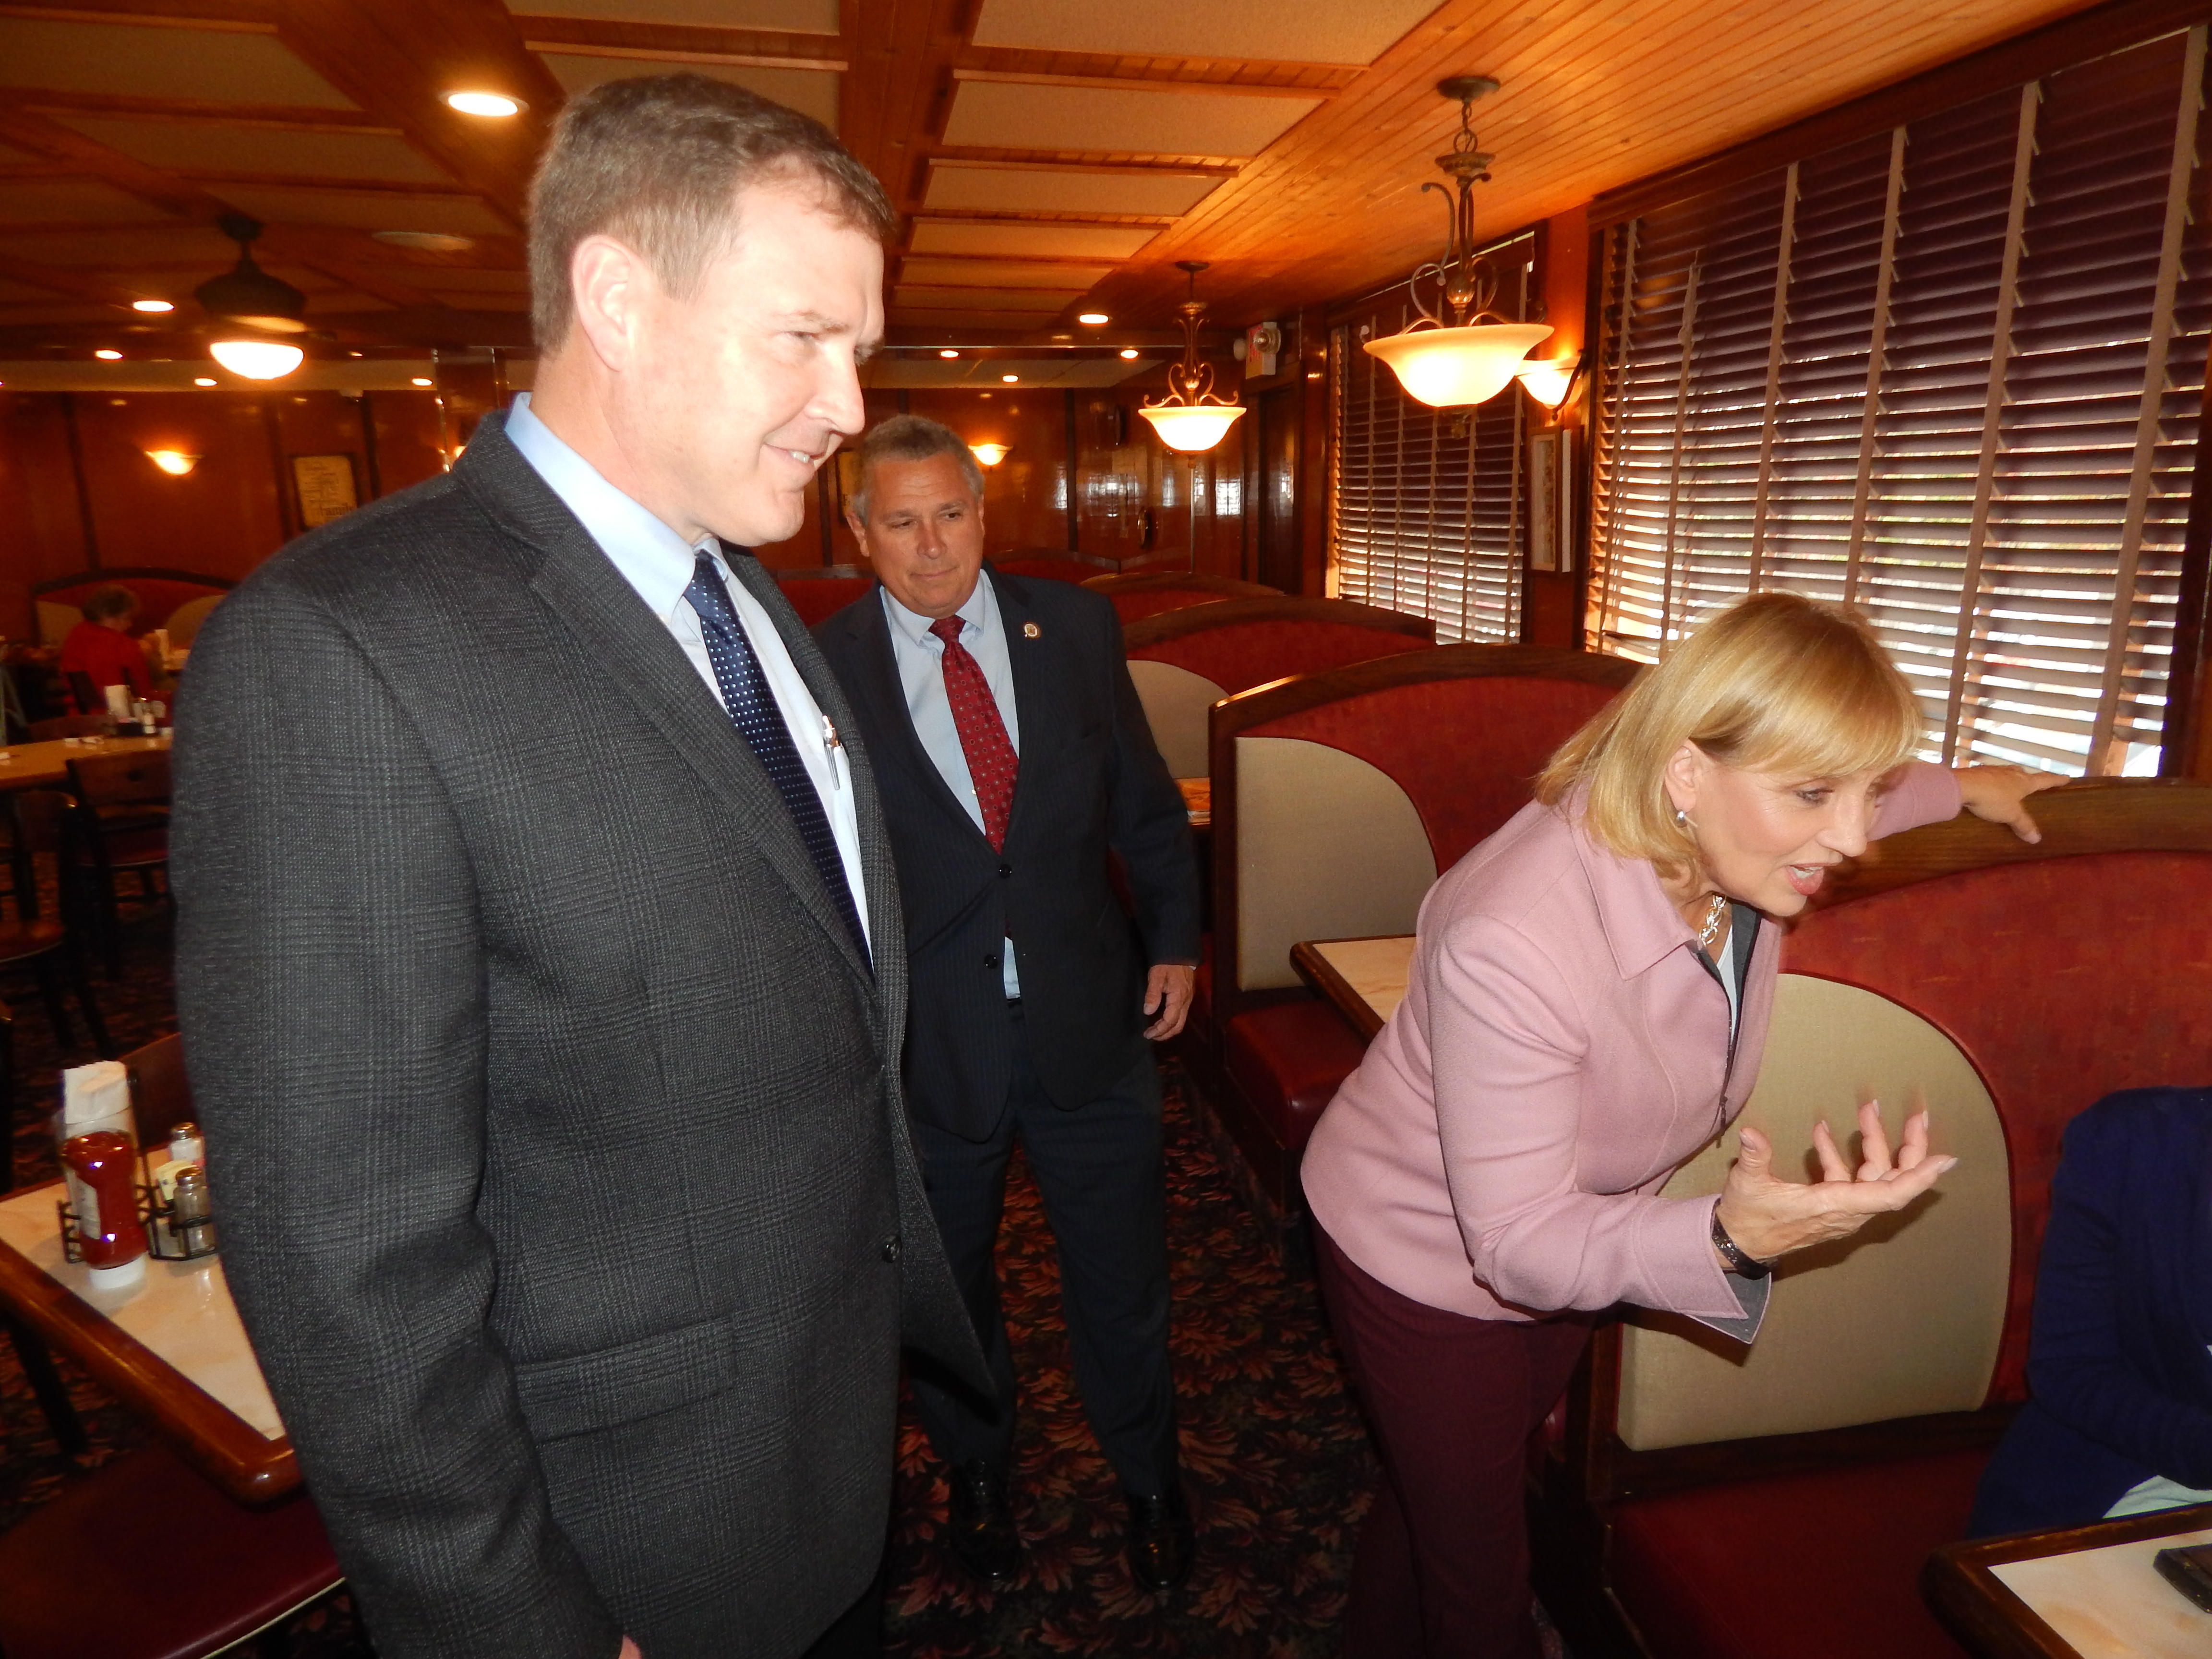 Bateman and Doherty campaigning in the final days of Election 2017 with Guv nominee Kim Guadagno.